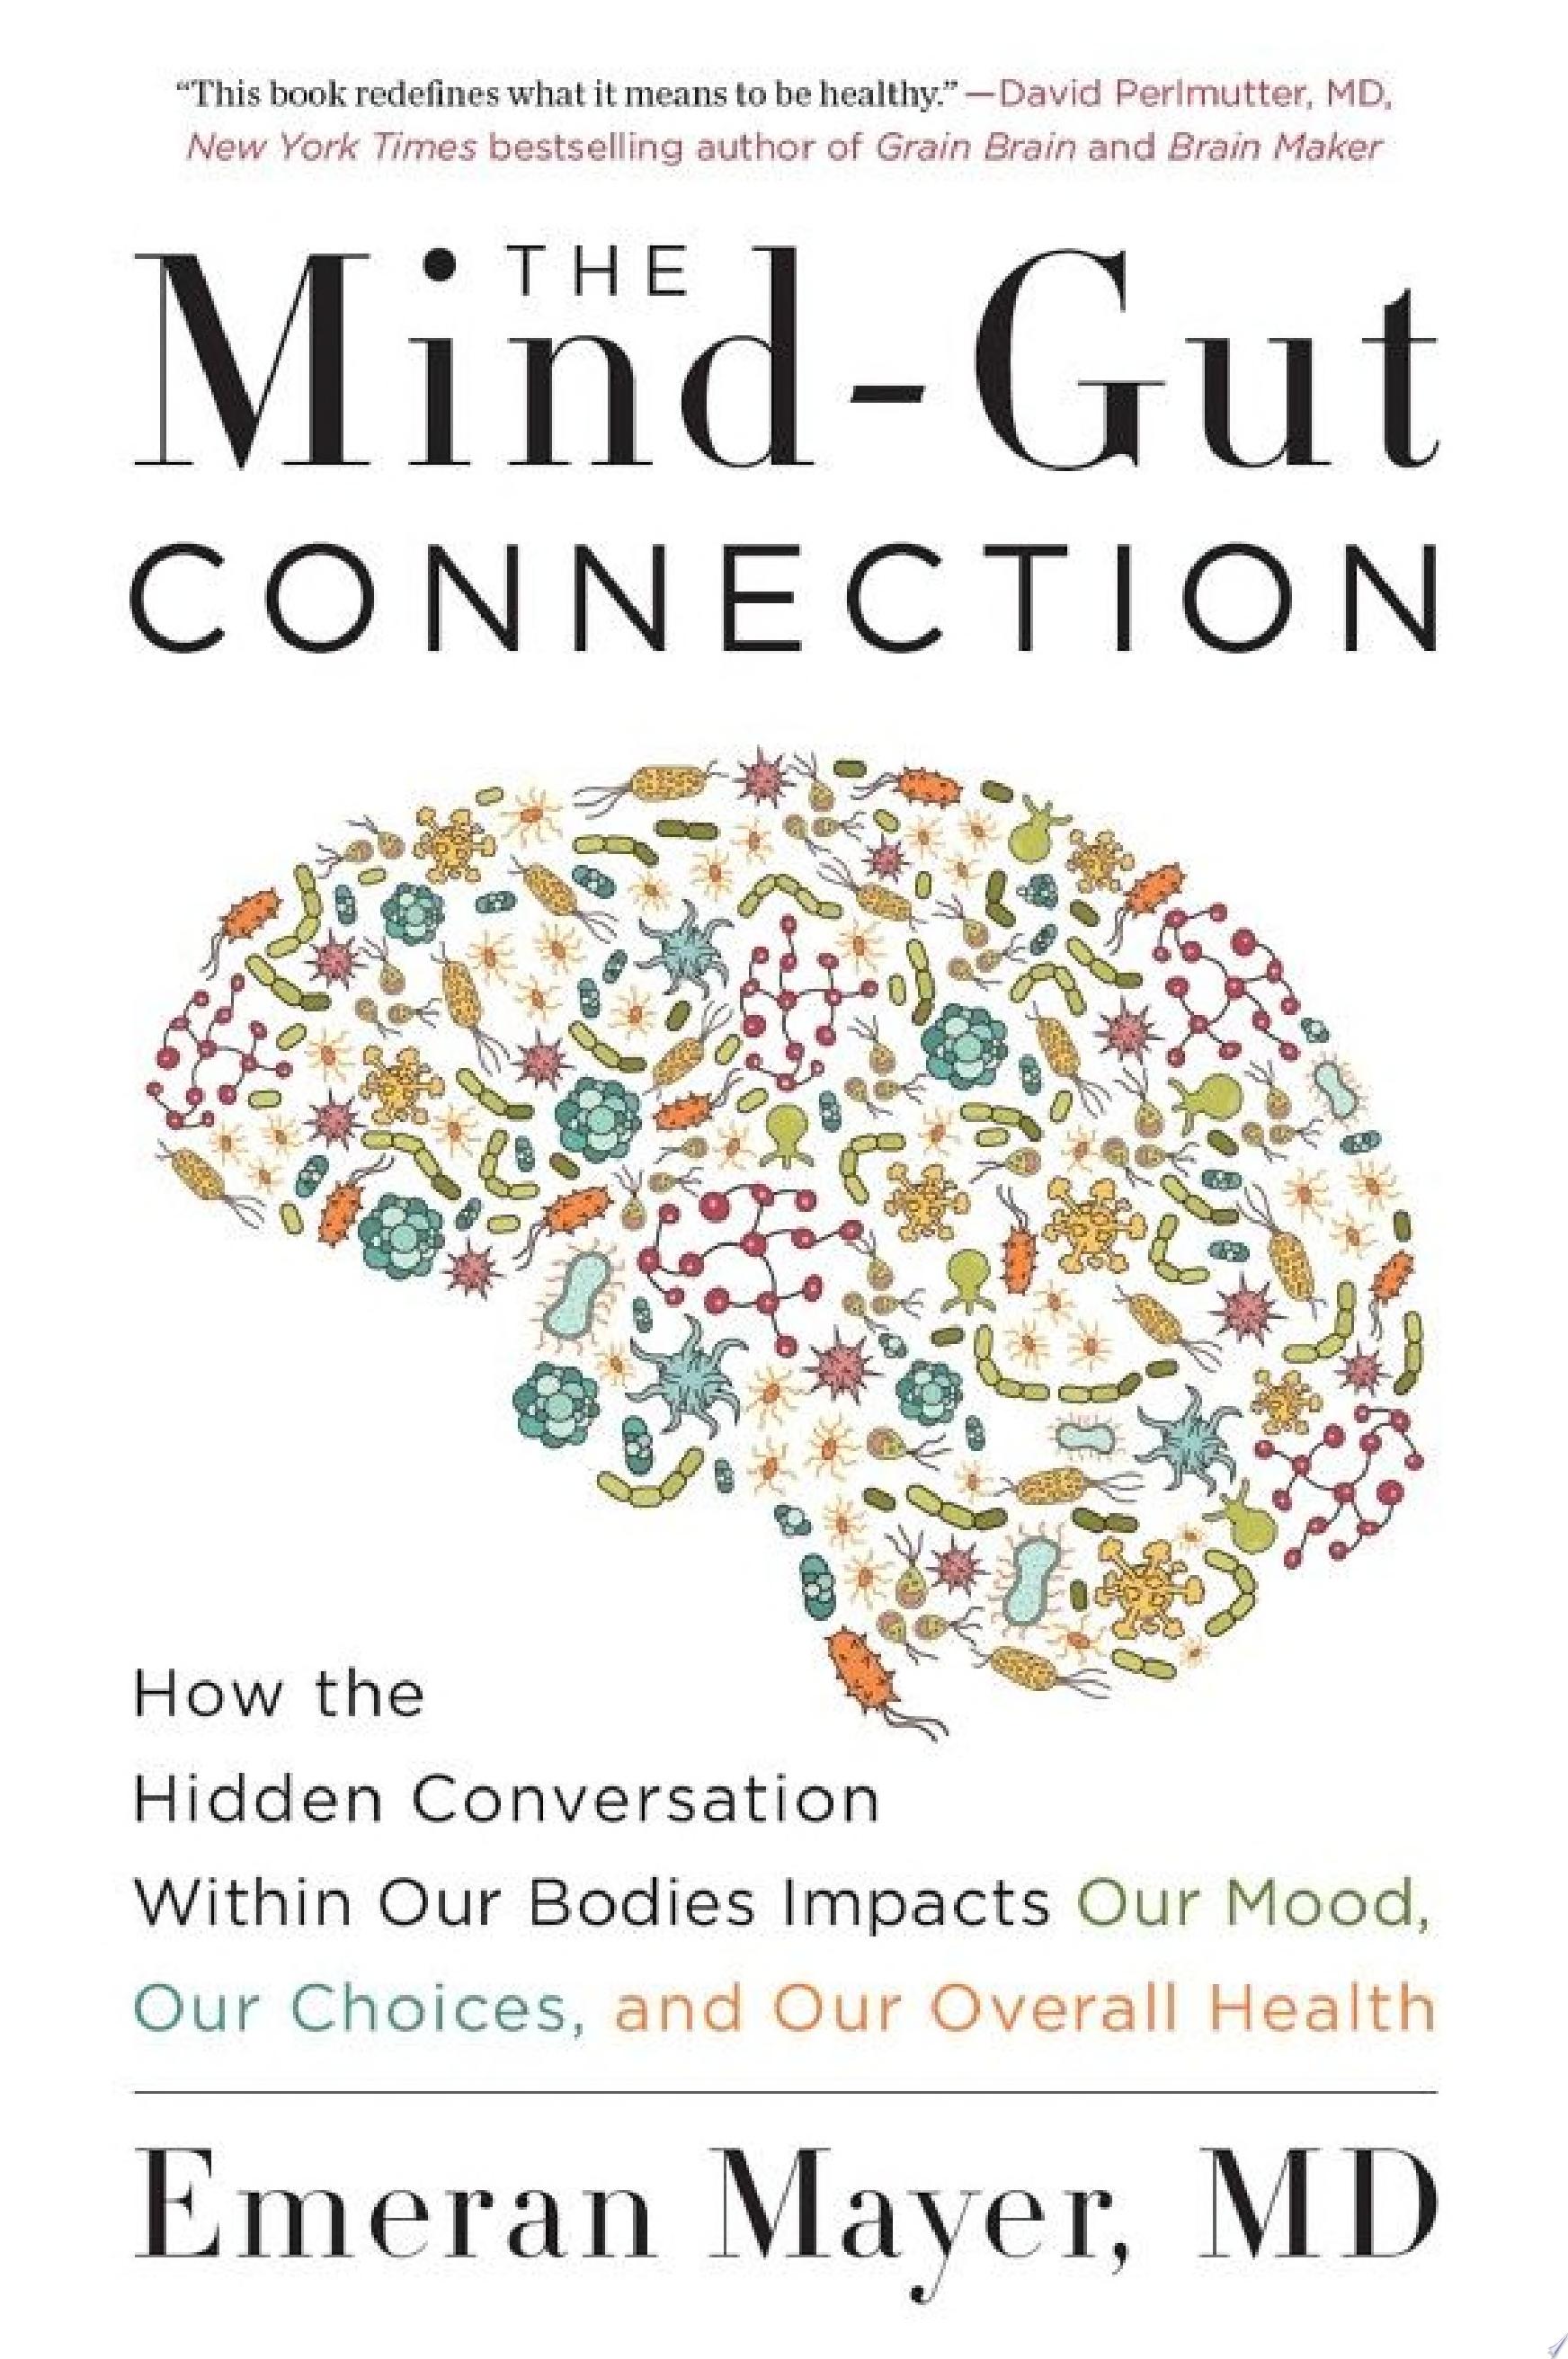 Image for "The Mind-Gut Connection"